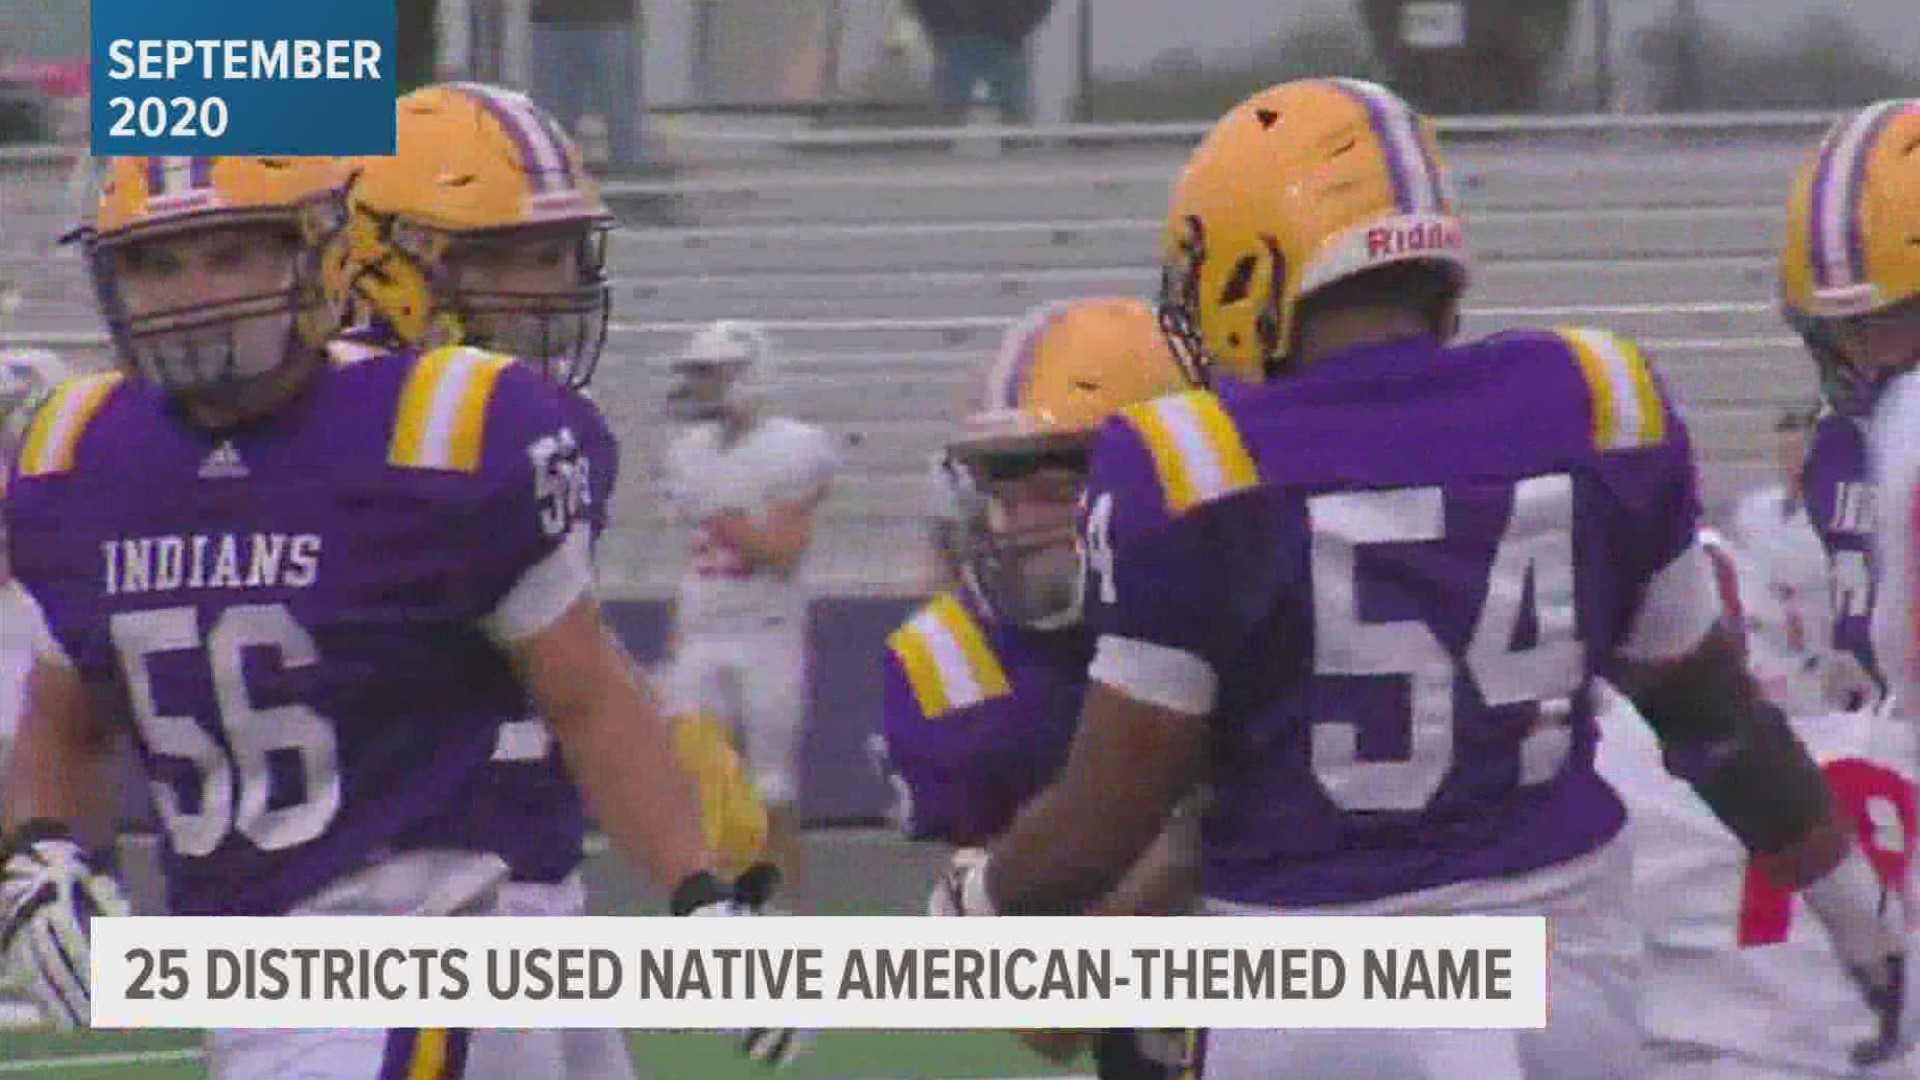 Local 5 found about 25 Iowa schools that have team names, mascots or symbols that reference Native Americans history or culture.